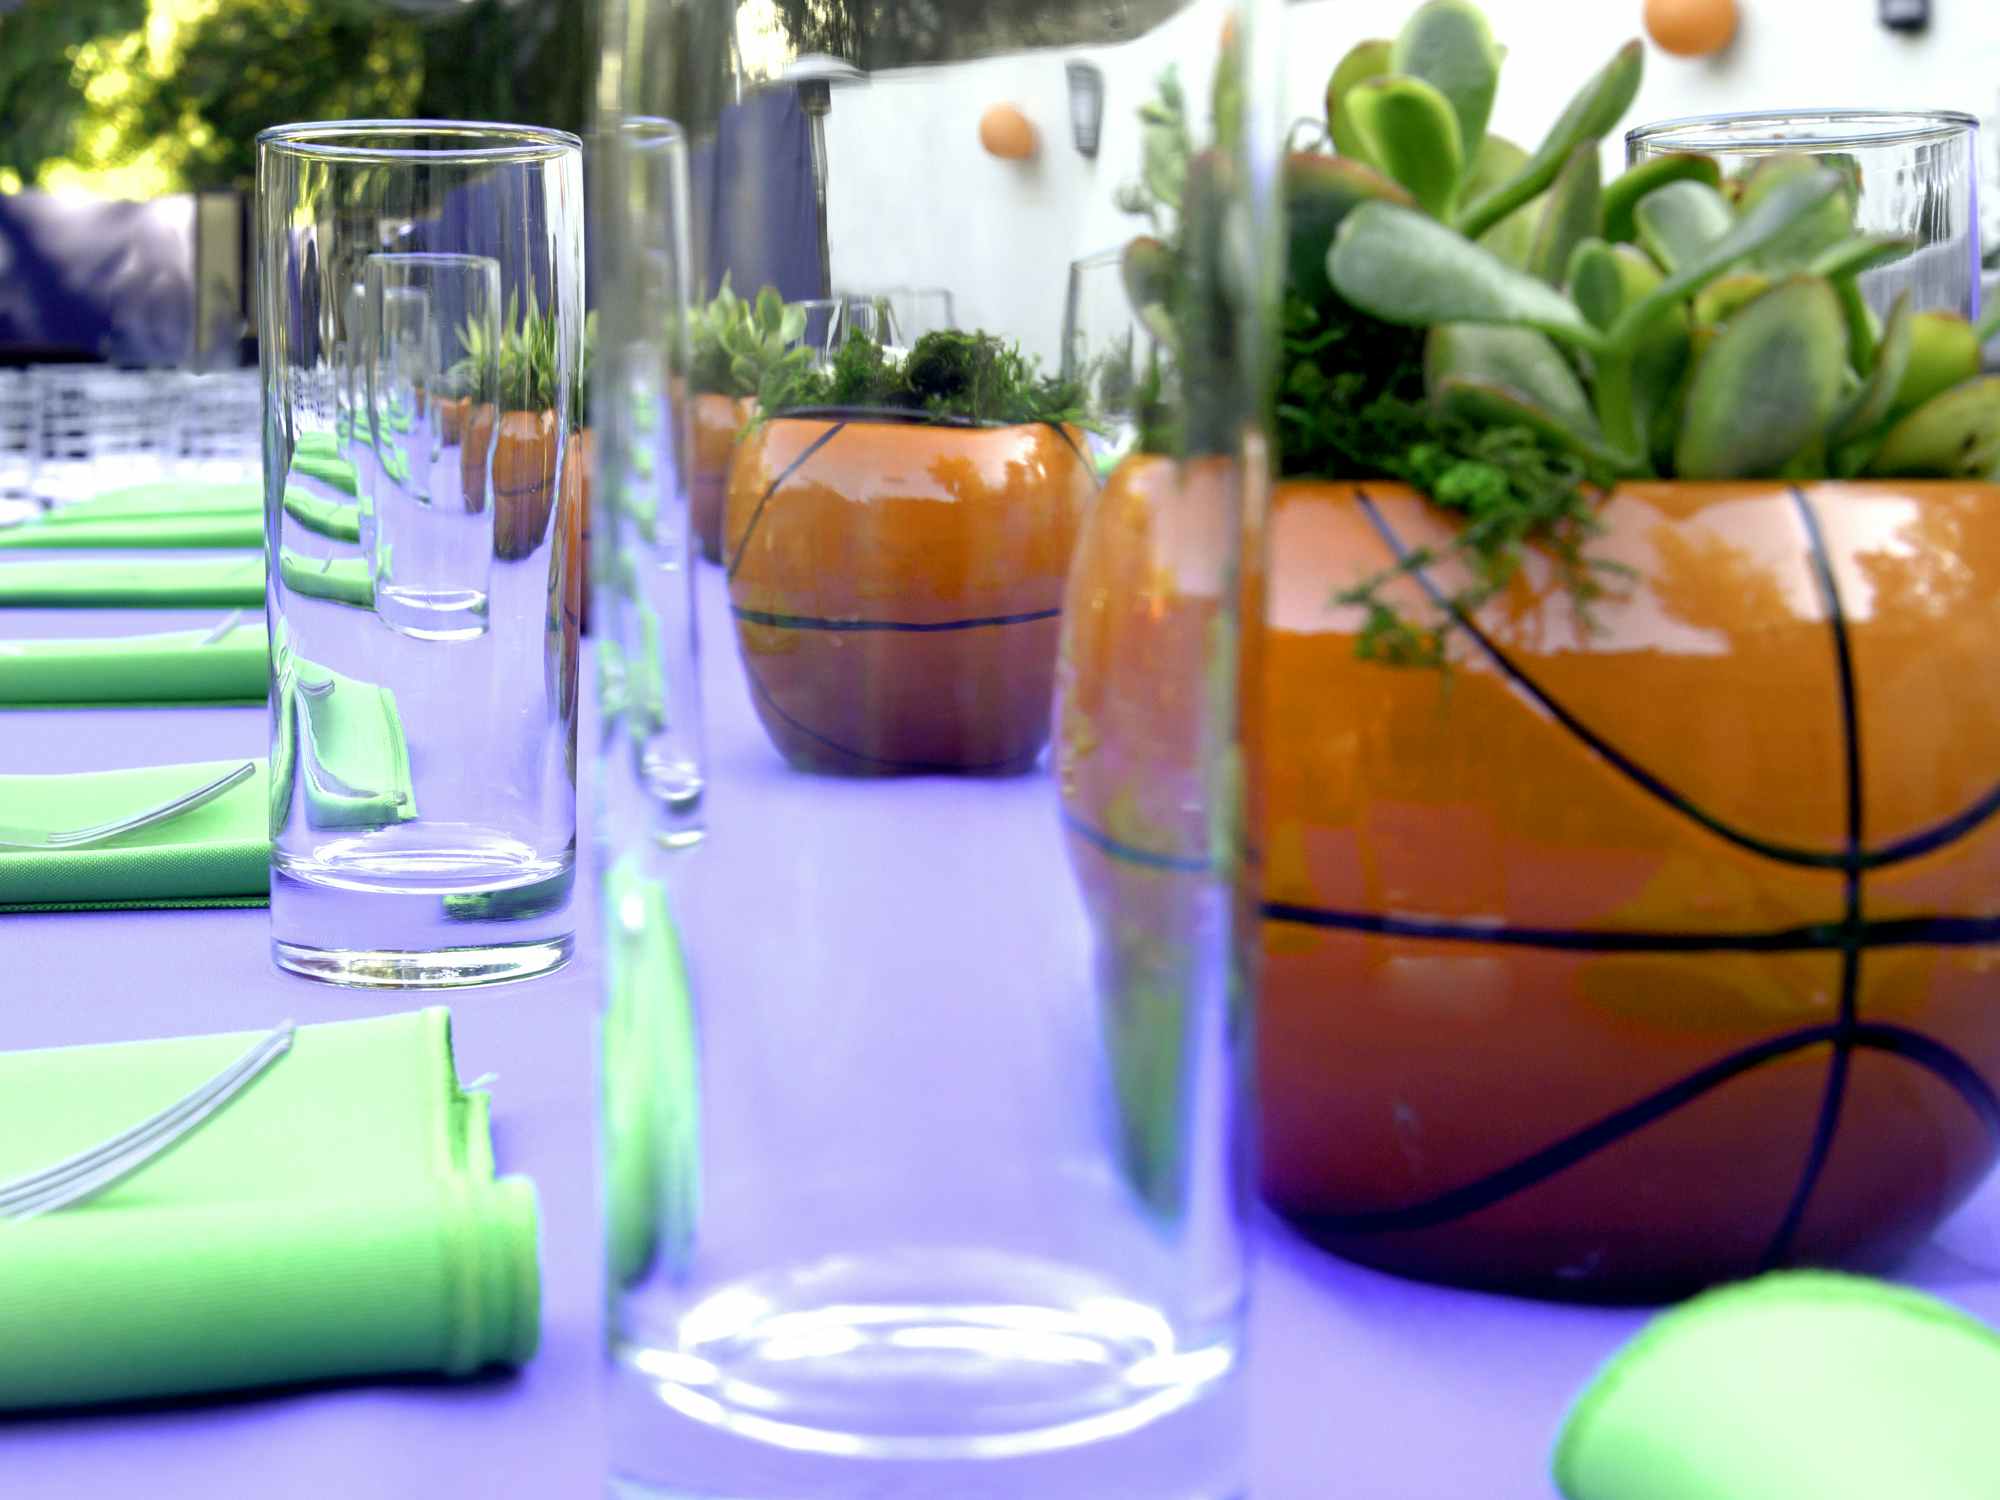 mini basketball planters with succulents on outdoor party table